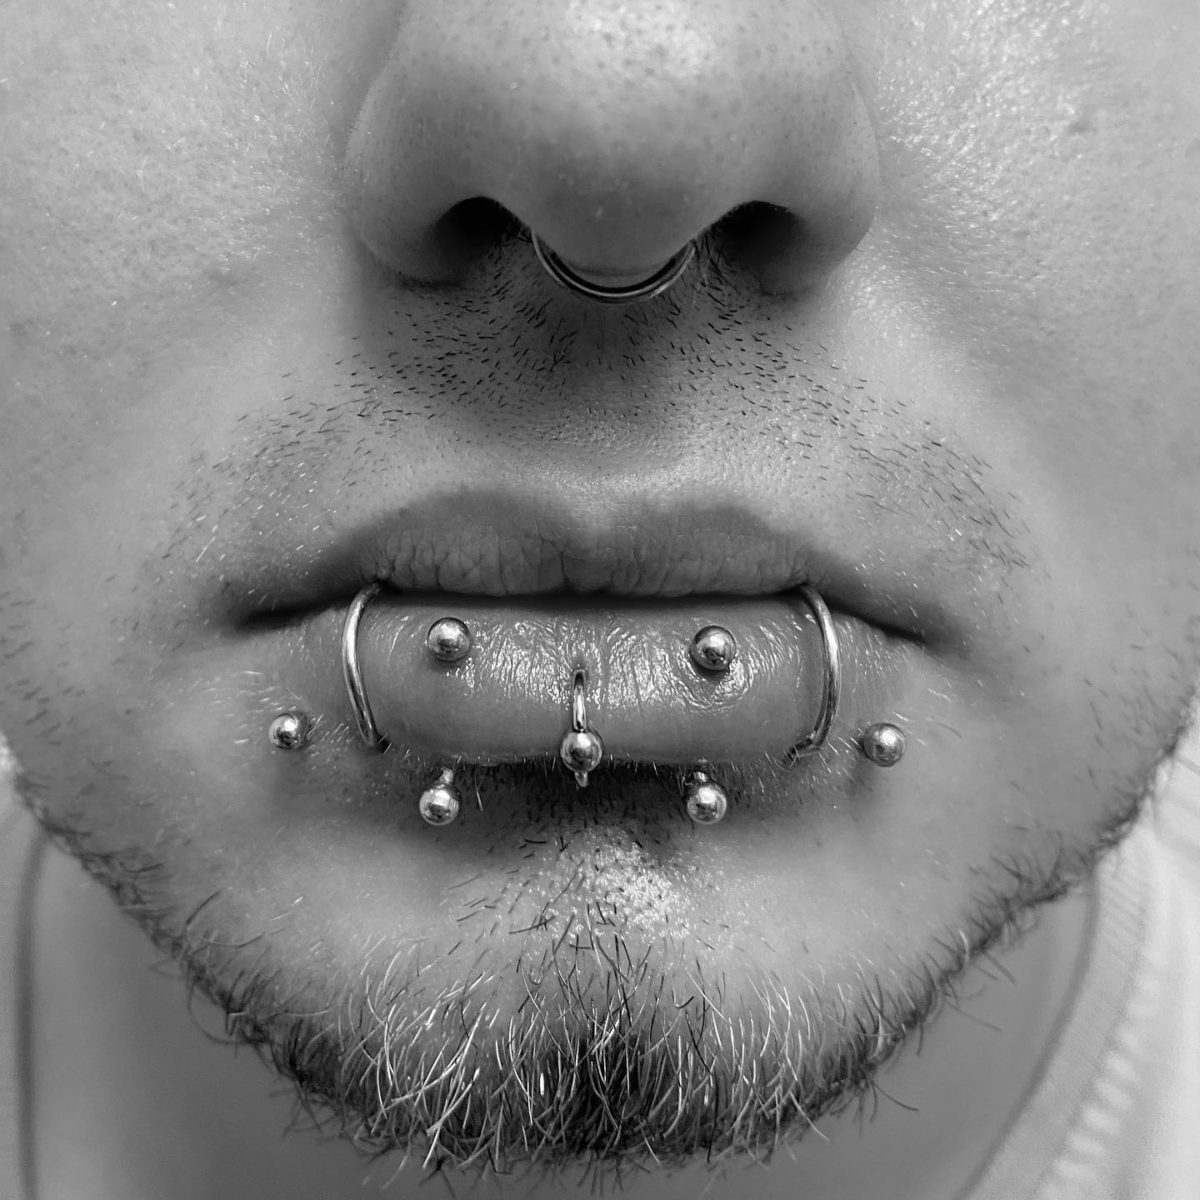 45 Extreme Piercings That Will Haunt You for Life | Ouch! Take a look at these extreme piercings and try not to wince.